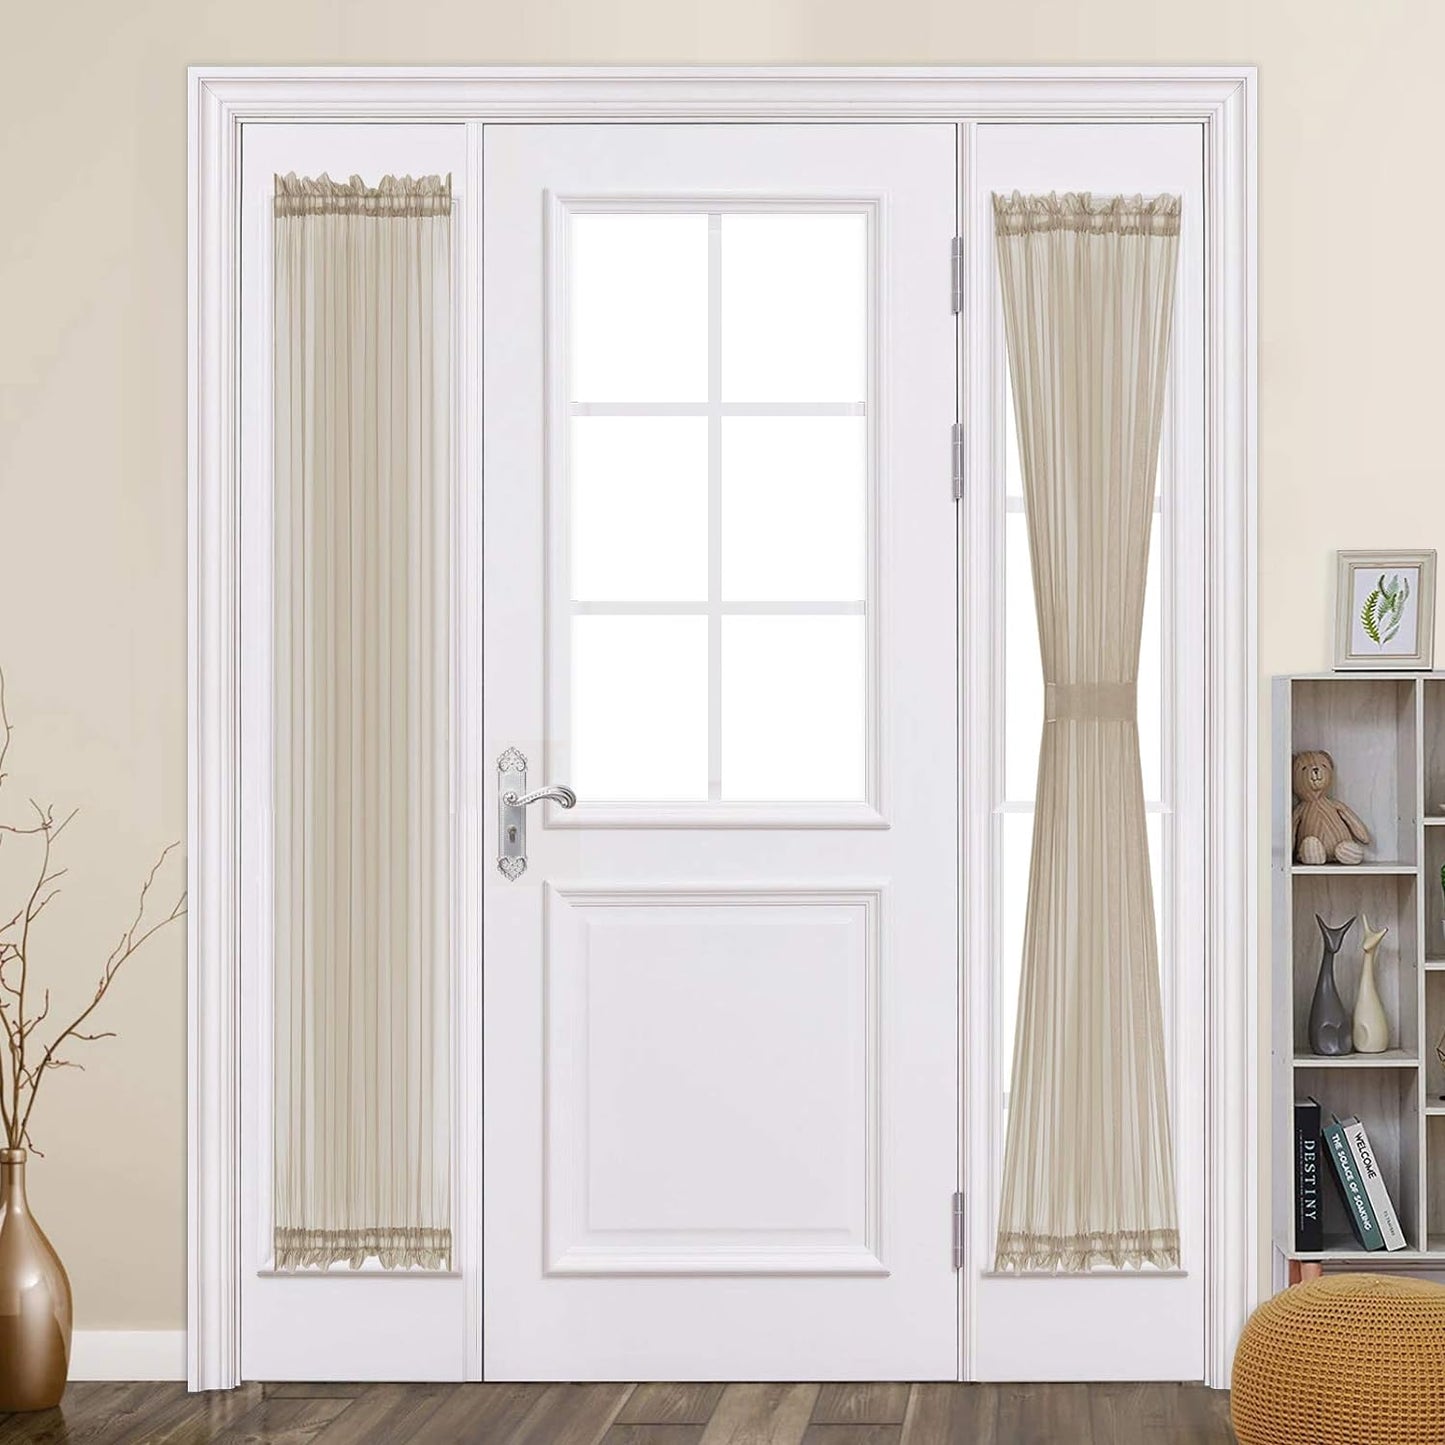 MIULEE French Door Sheer Curtains for Front Back Patio Glass Door Light Filtering Window Treatment with 2 Tiebacks 54 Wide and 72 Inches Length, White, Set of 2  MIULEE Beige 25"W X 72"L 